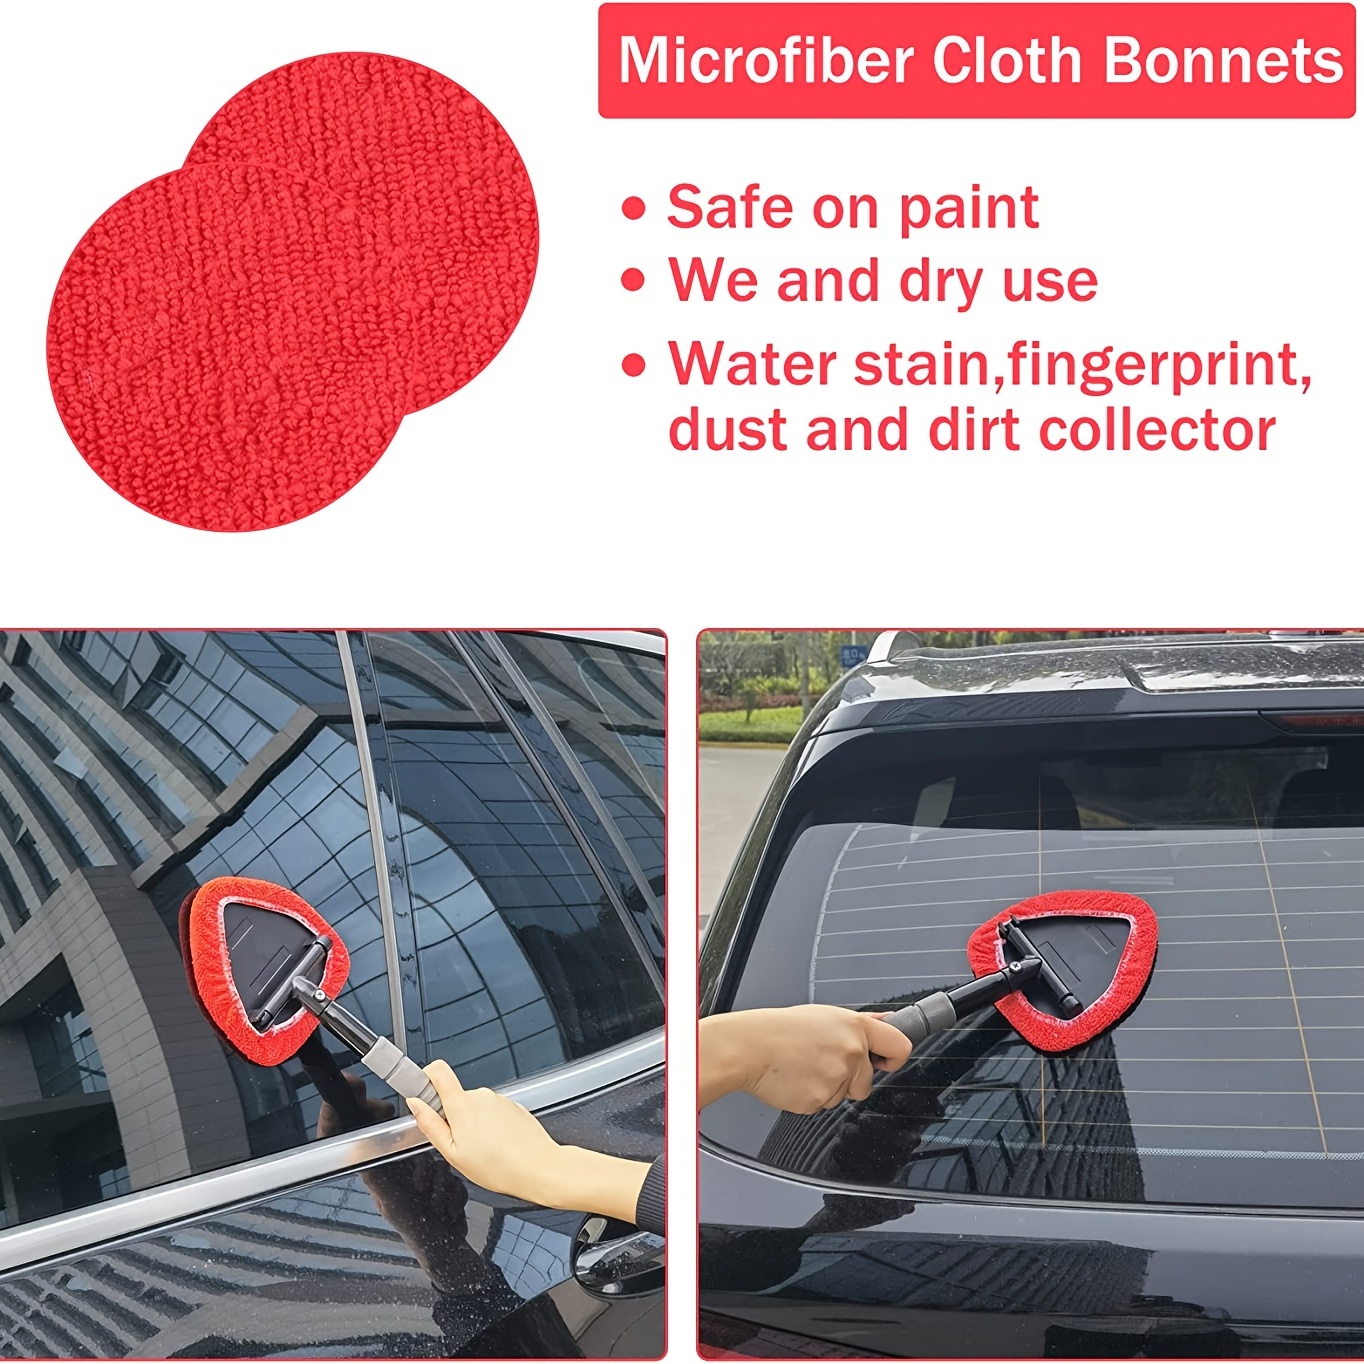 Generic Windshield Cleaning Tool, Car Window Cleaner with 4 Washable  Reusable Microfiber Pads, Extendable Long Handle Glass Wiper Clean